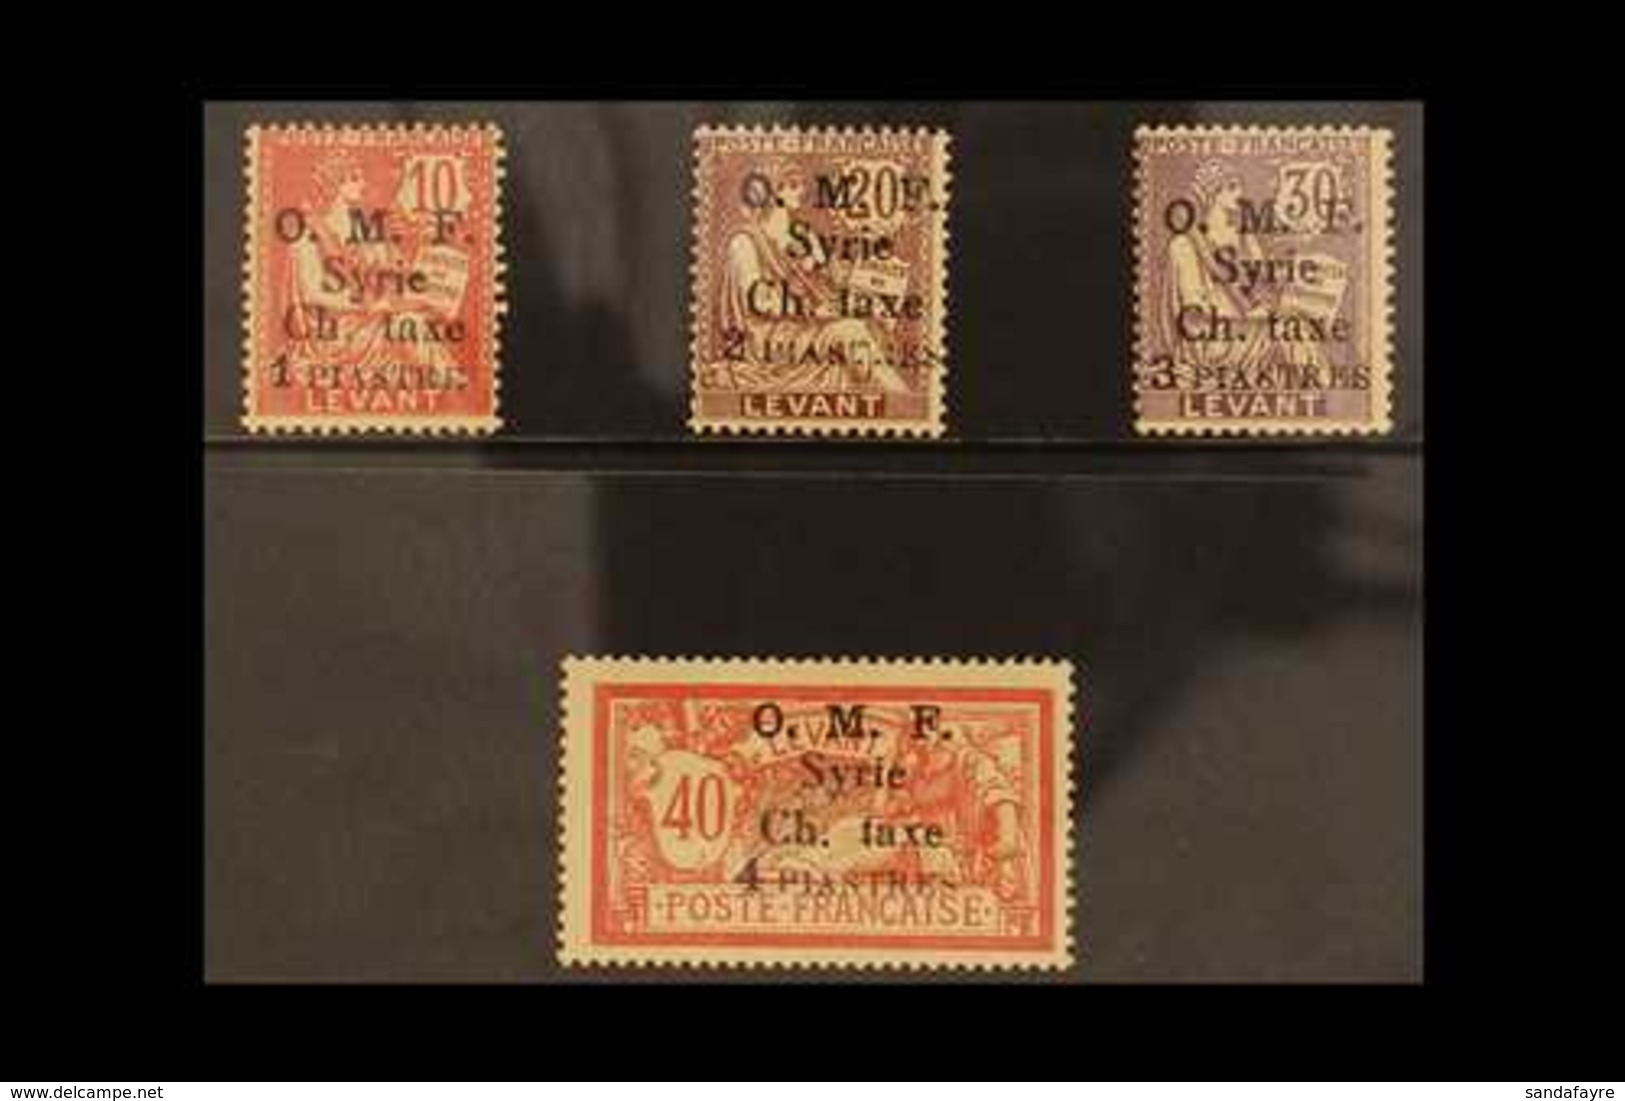 POSTAGE DUES 1920 O.M.F. Ch. Taxe Ovpt On Stamps Of French Offices, SG 48/51, Very Fine Mint. Rare And Elusive Set. (4 S - Syrie